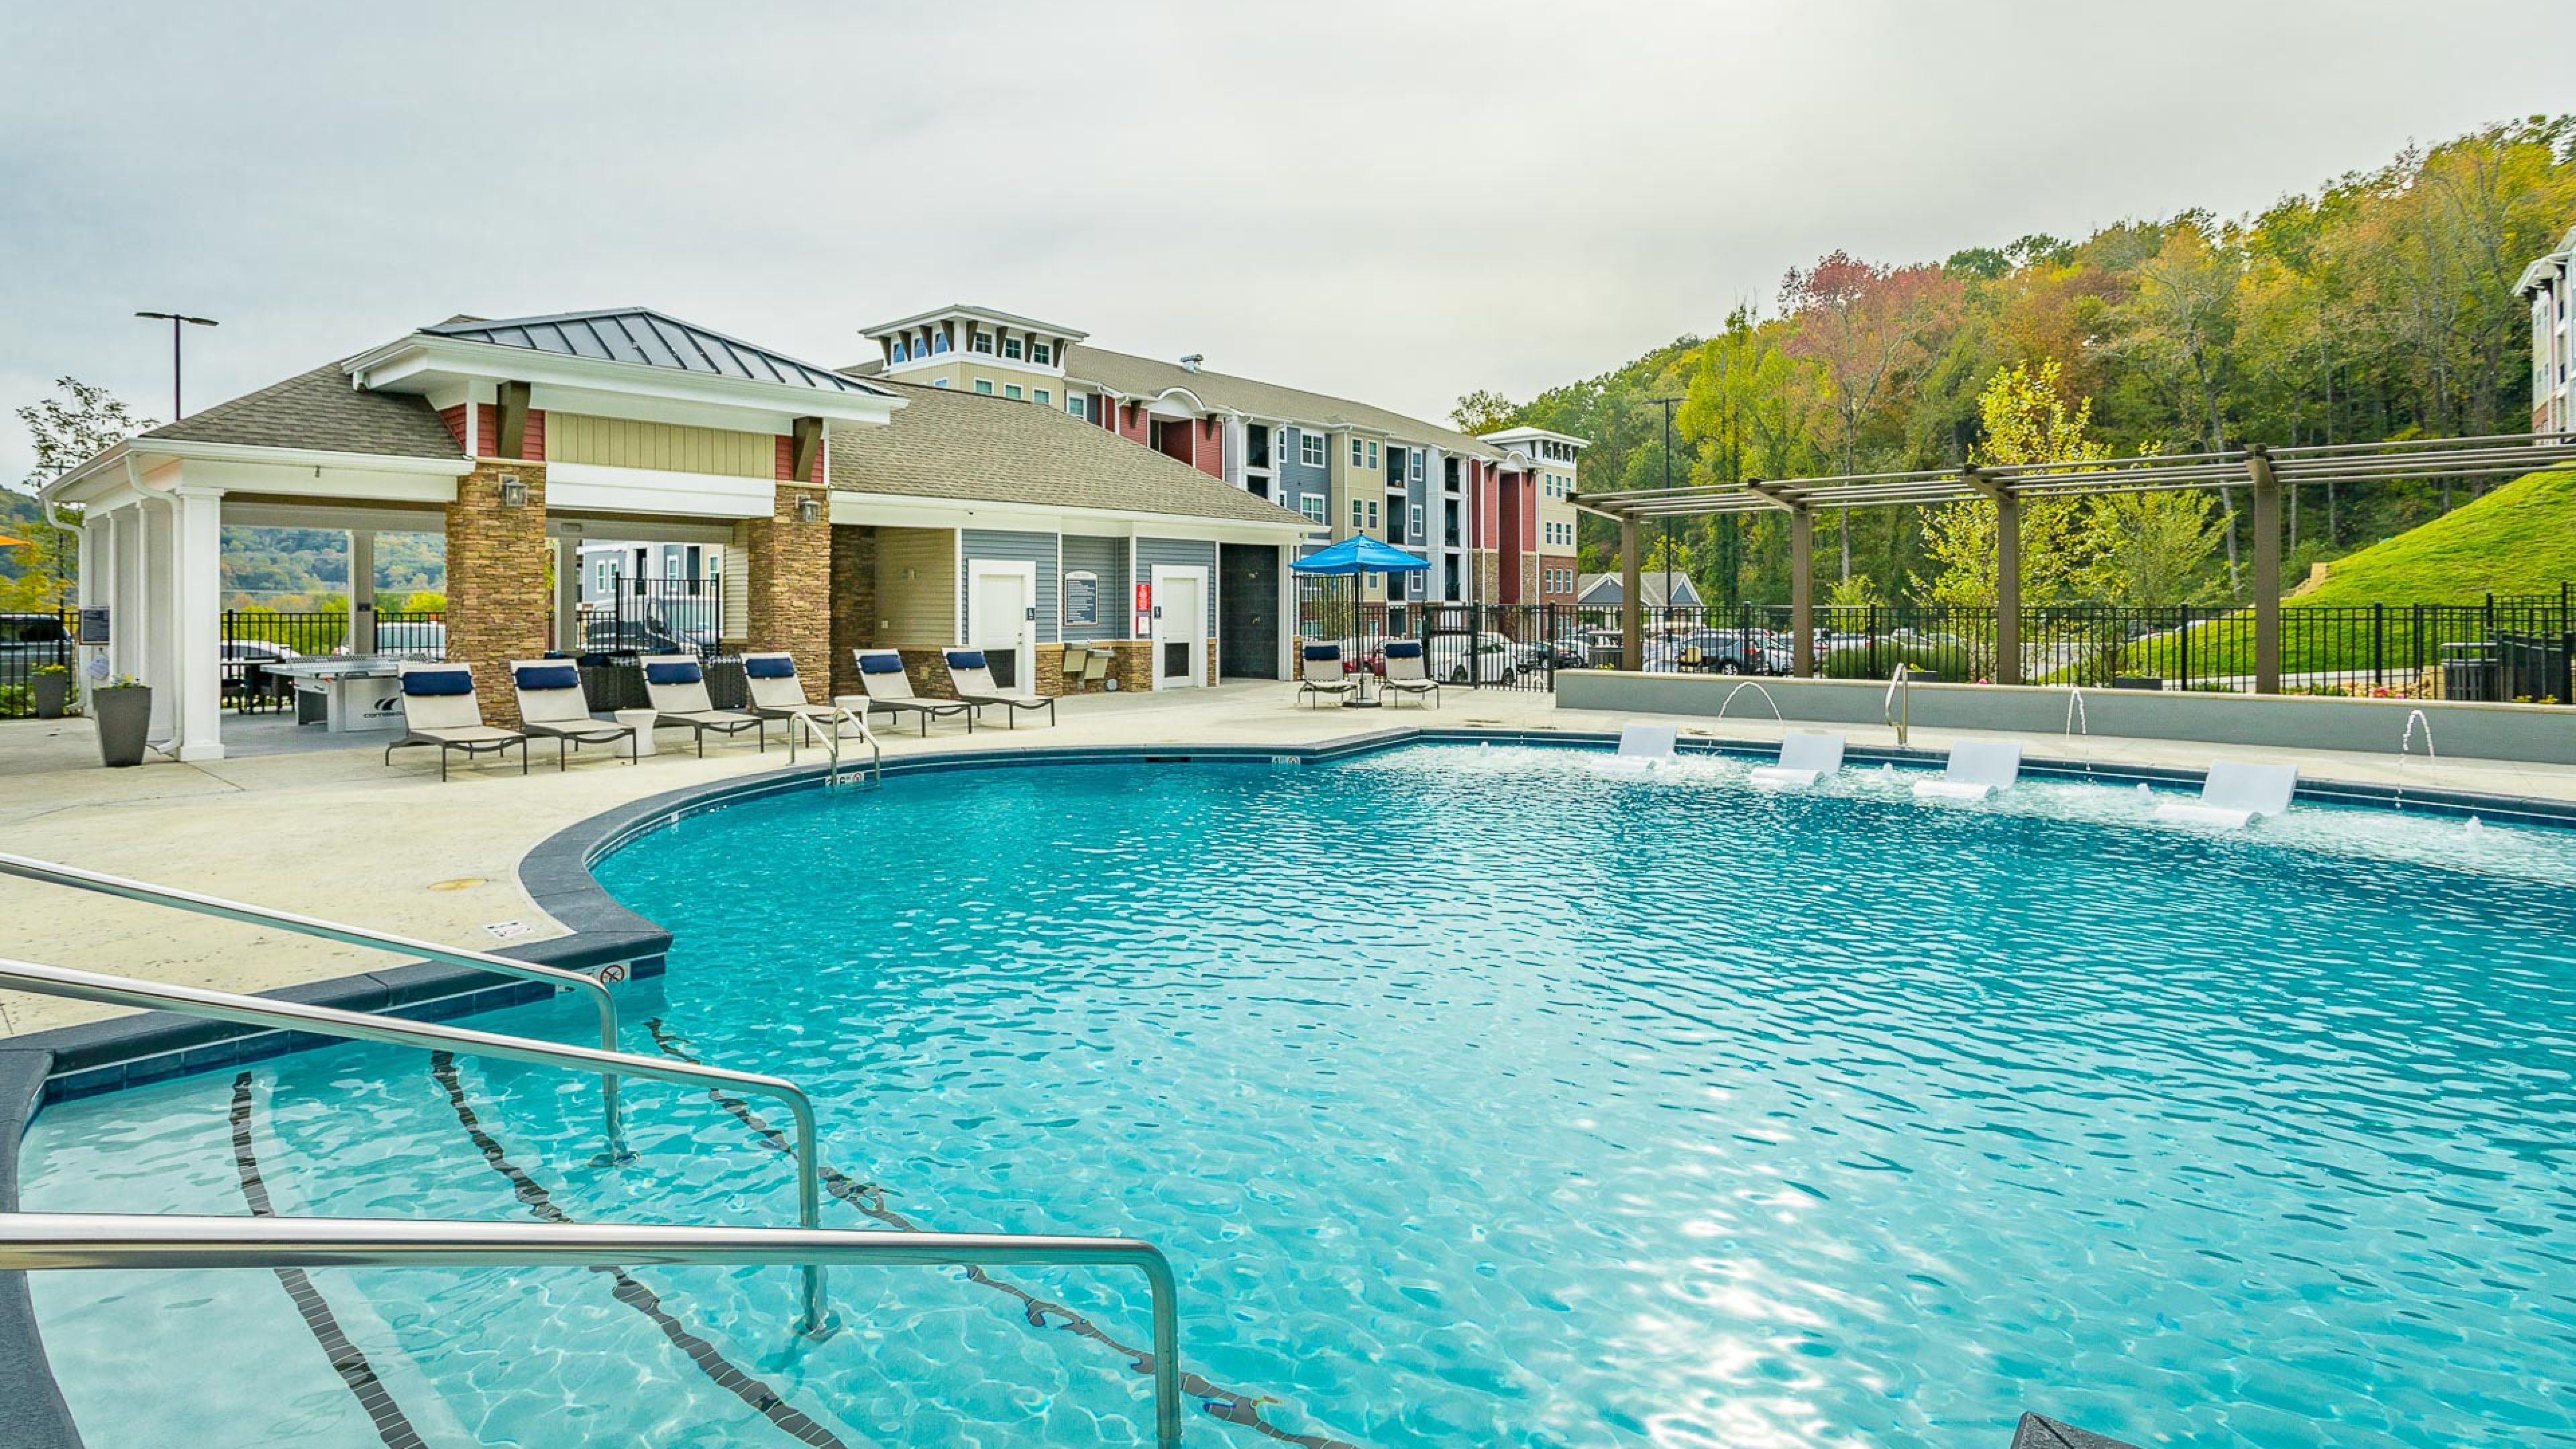 Hawthorne at the Wluxury outdoor pool with in-pool lounge chairs and surrounding seating